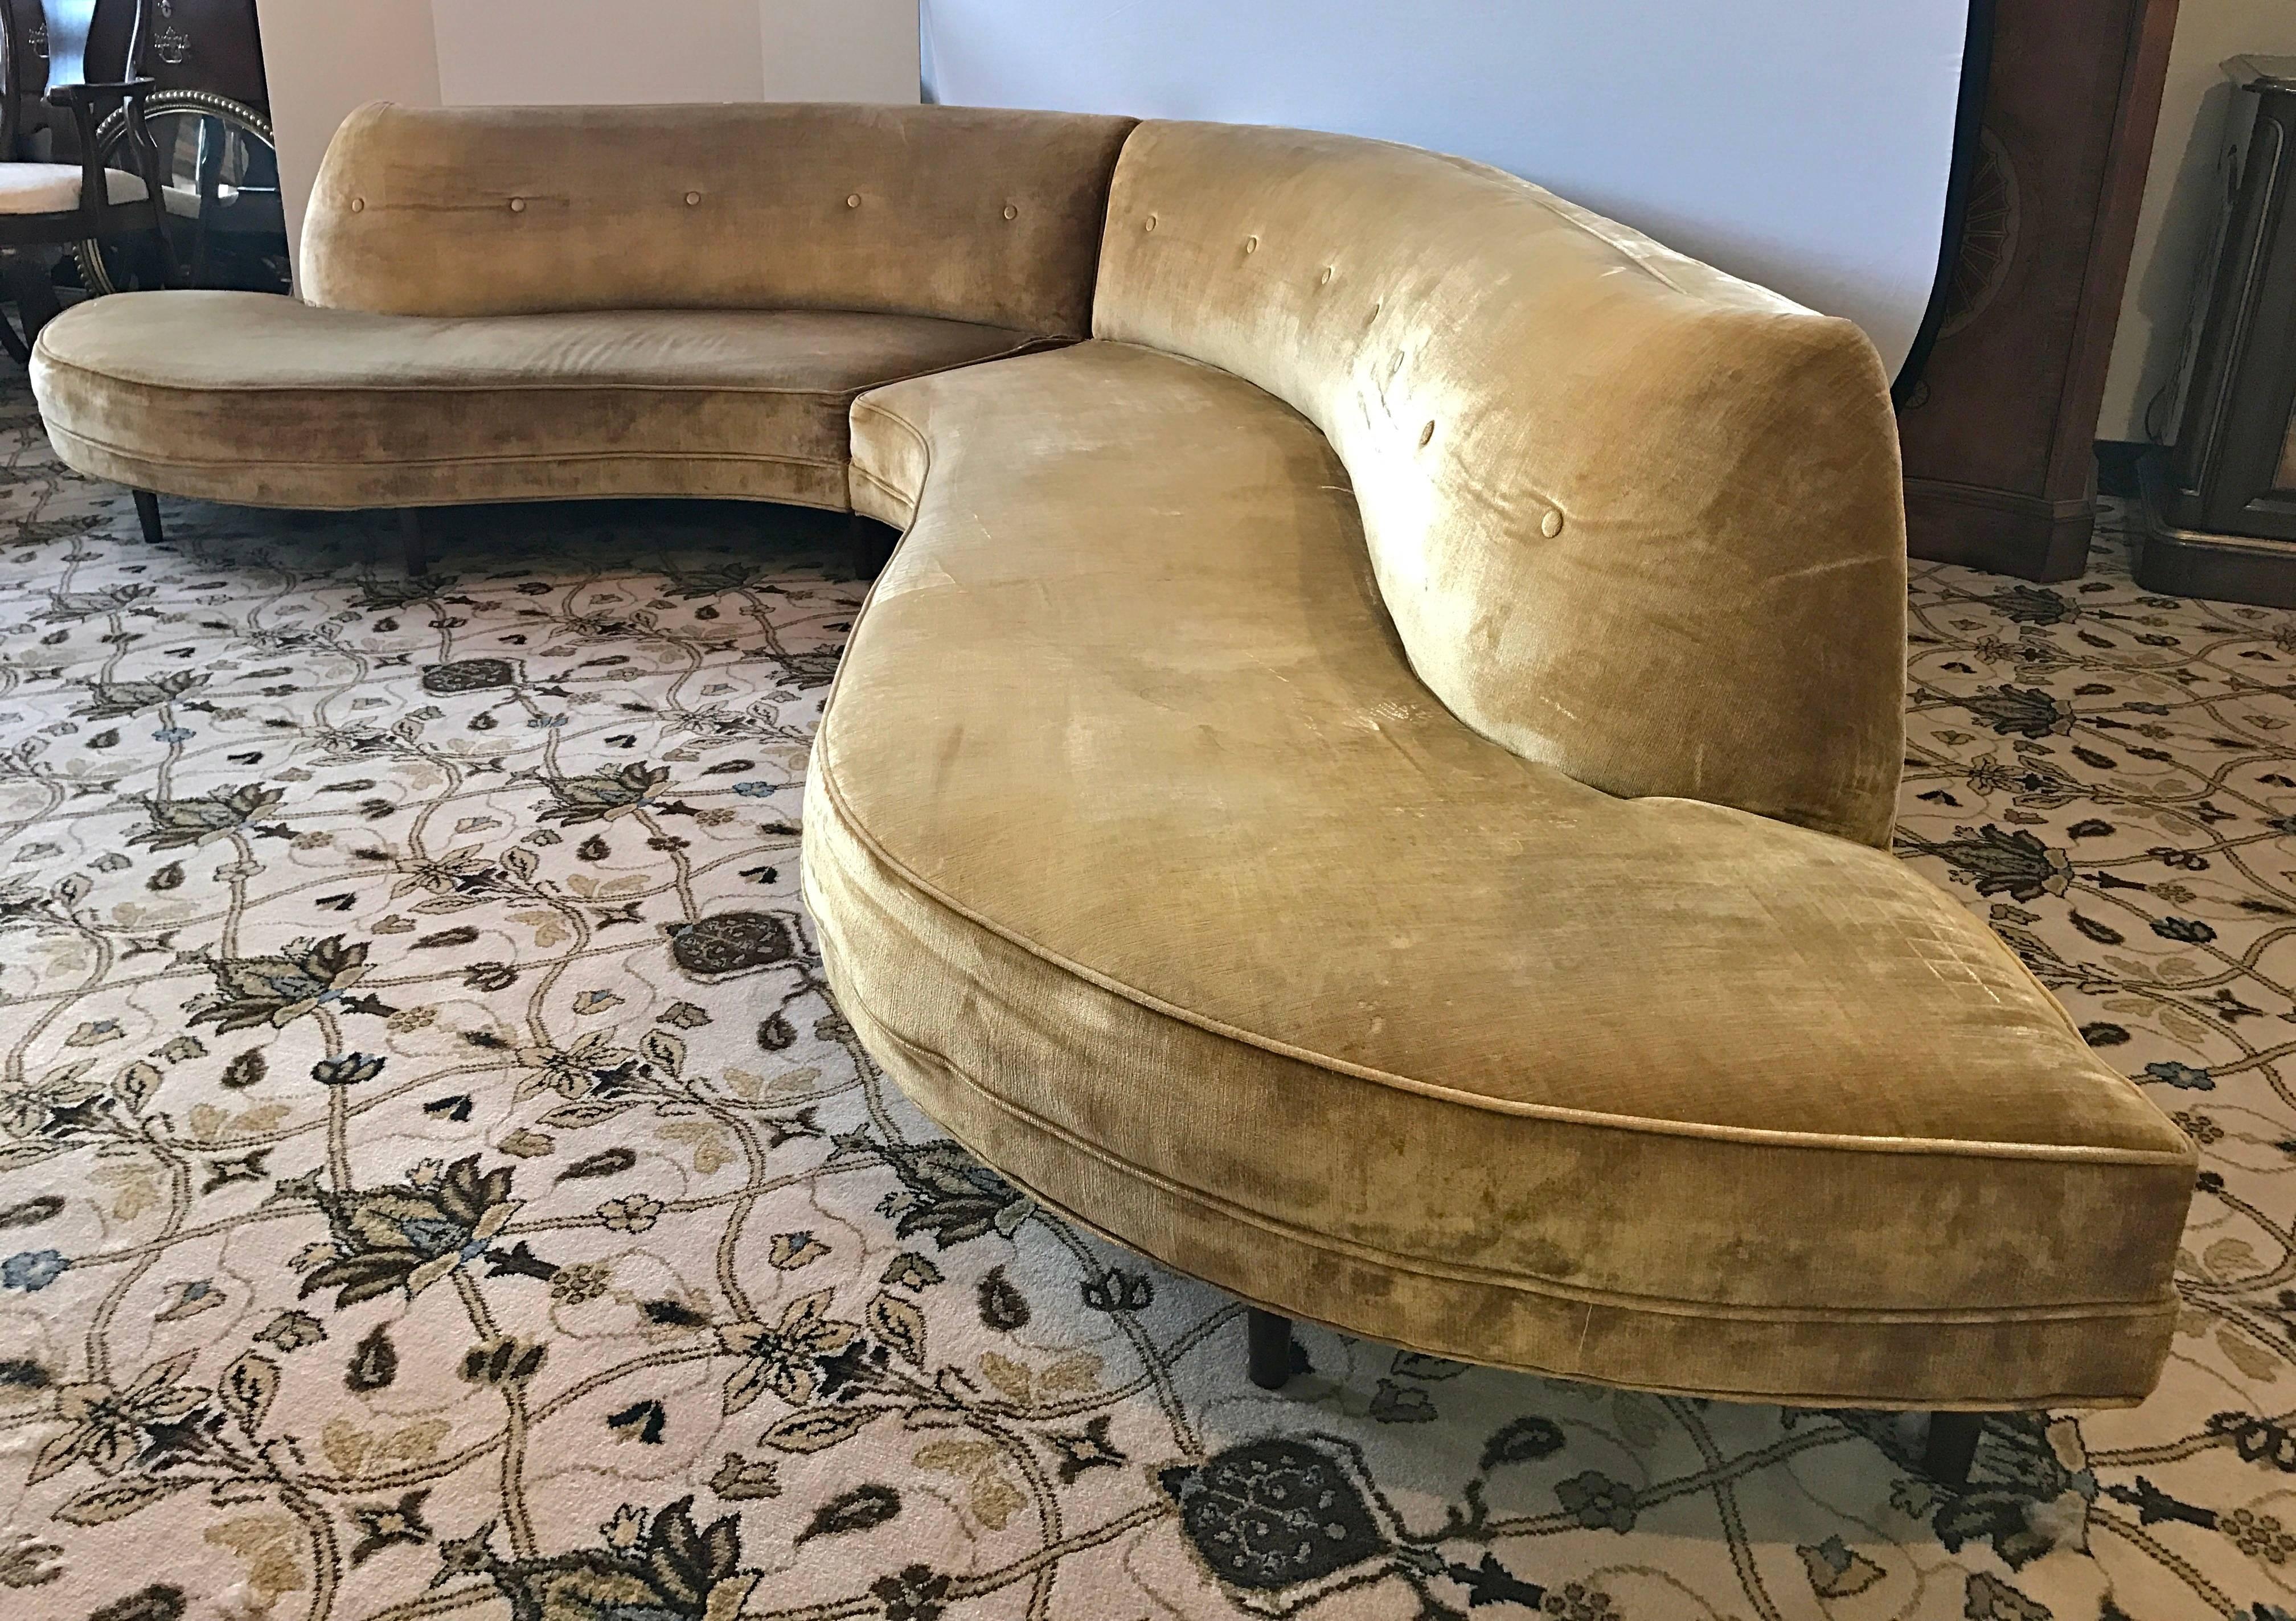 Coveted 1950s two-piece serpentine sectional sofa in the style of Vladimir Kagan. Dimensions are below and dimensions of each of the two pieces are 96 inches and 75 inches respectively. Gold velvet fabric is original and would need reupholstery